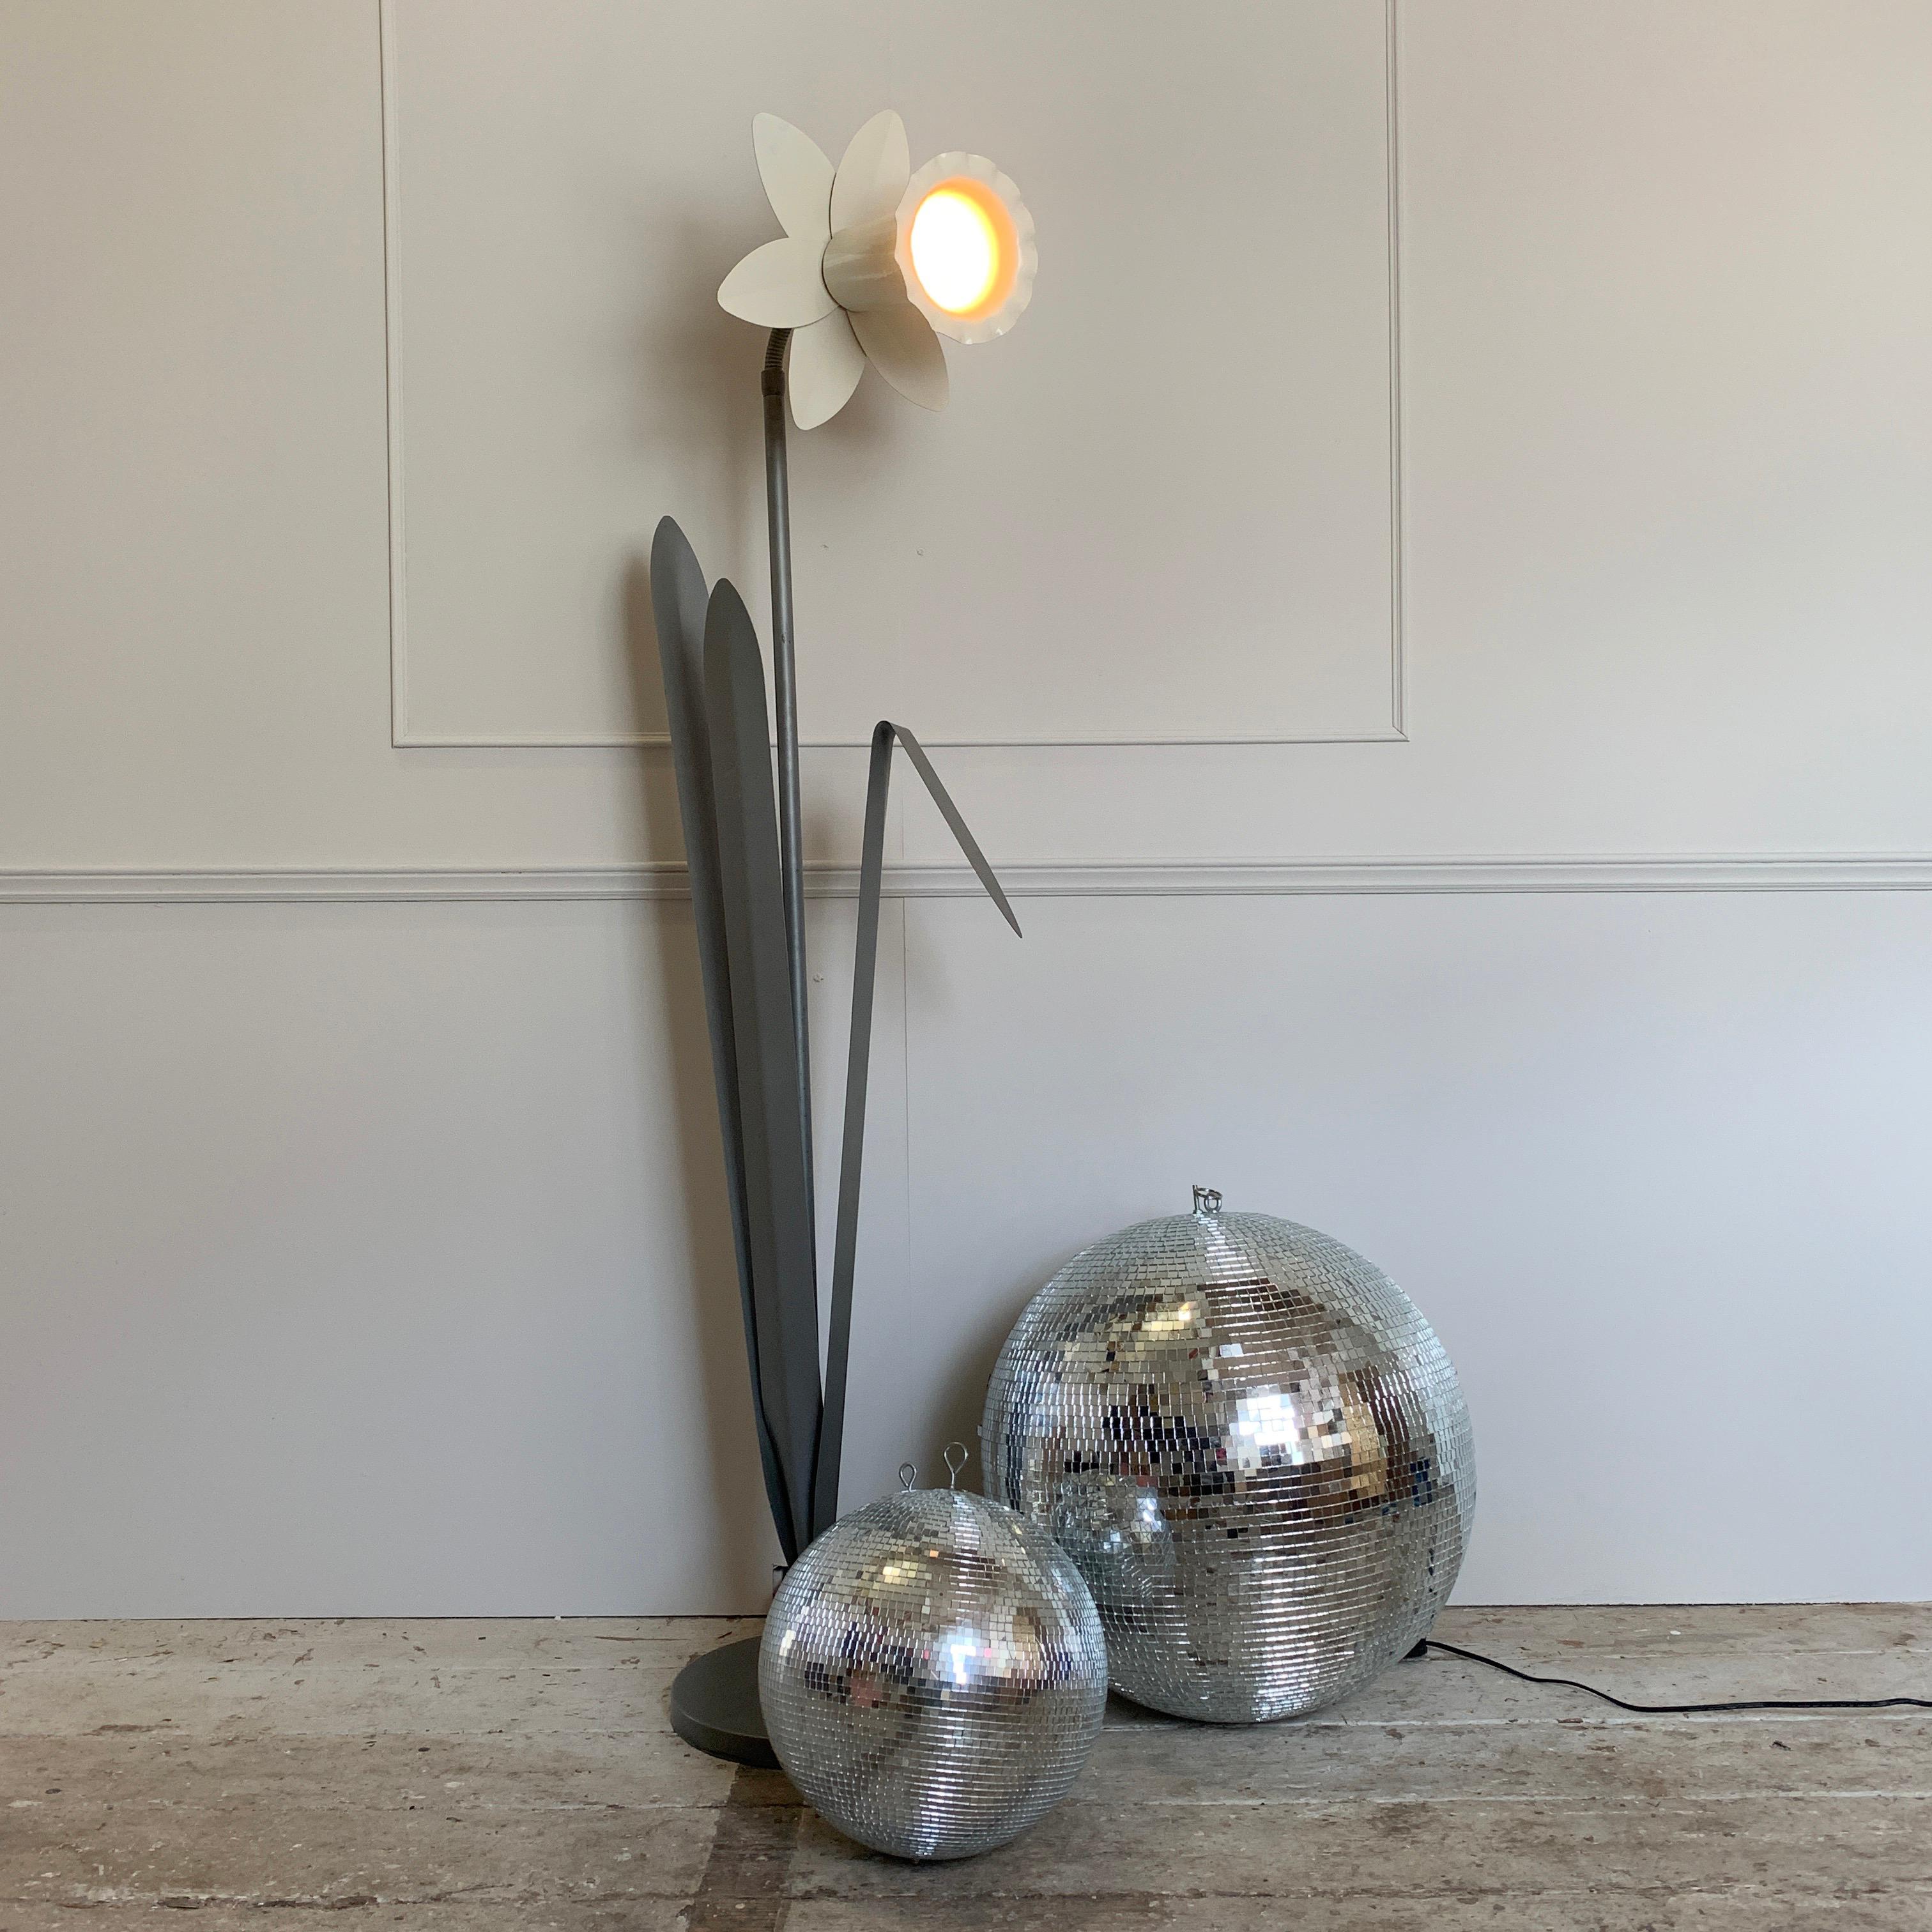 Pop art style rare silver and white bliss daffodil floor lamp
Bliss UK, 1980s
This daffodil bliss floor lamp is in the rare silver with white combination
The tall angled stem carries the large white daffodil head on a gooseneck angled stem
Three